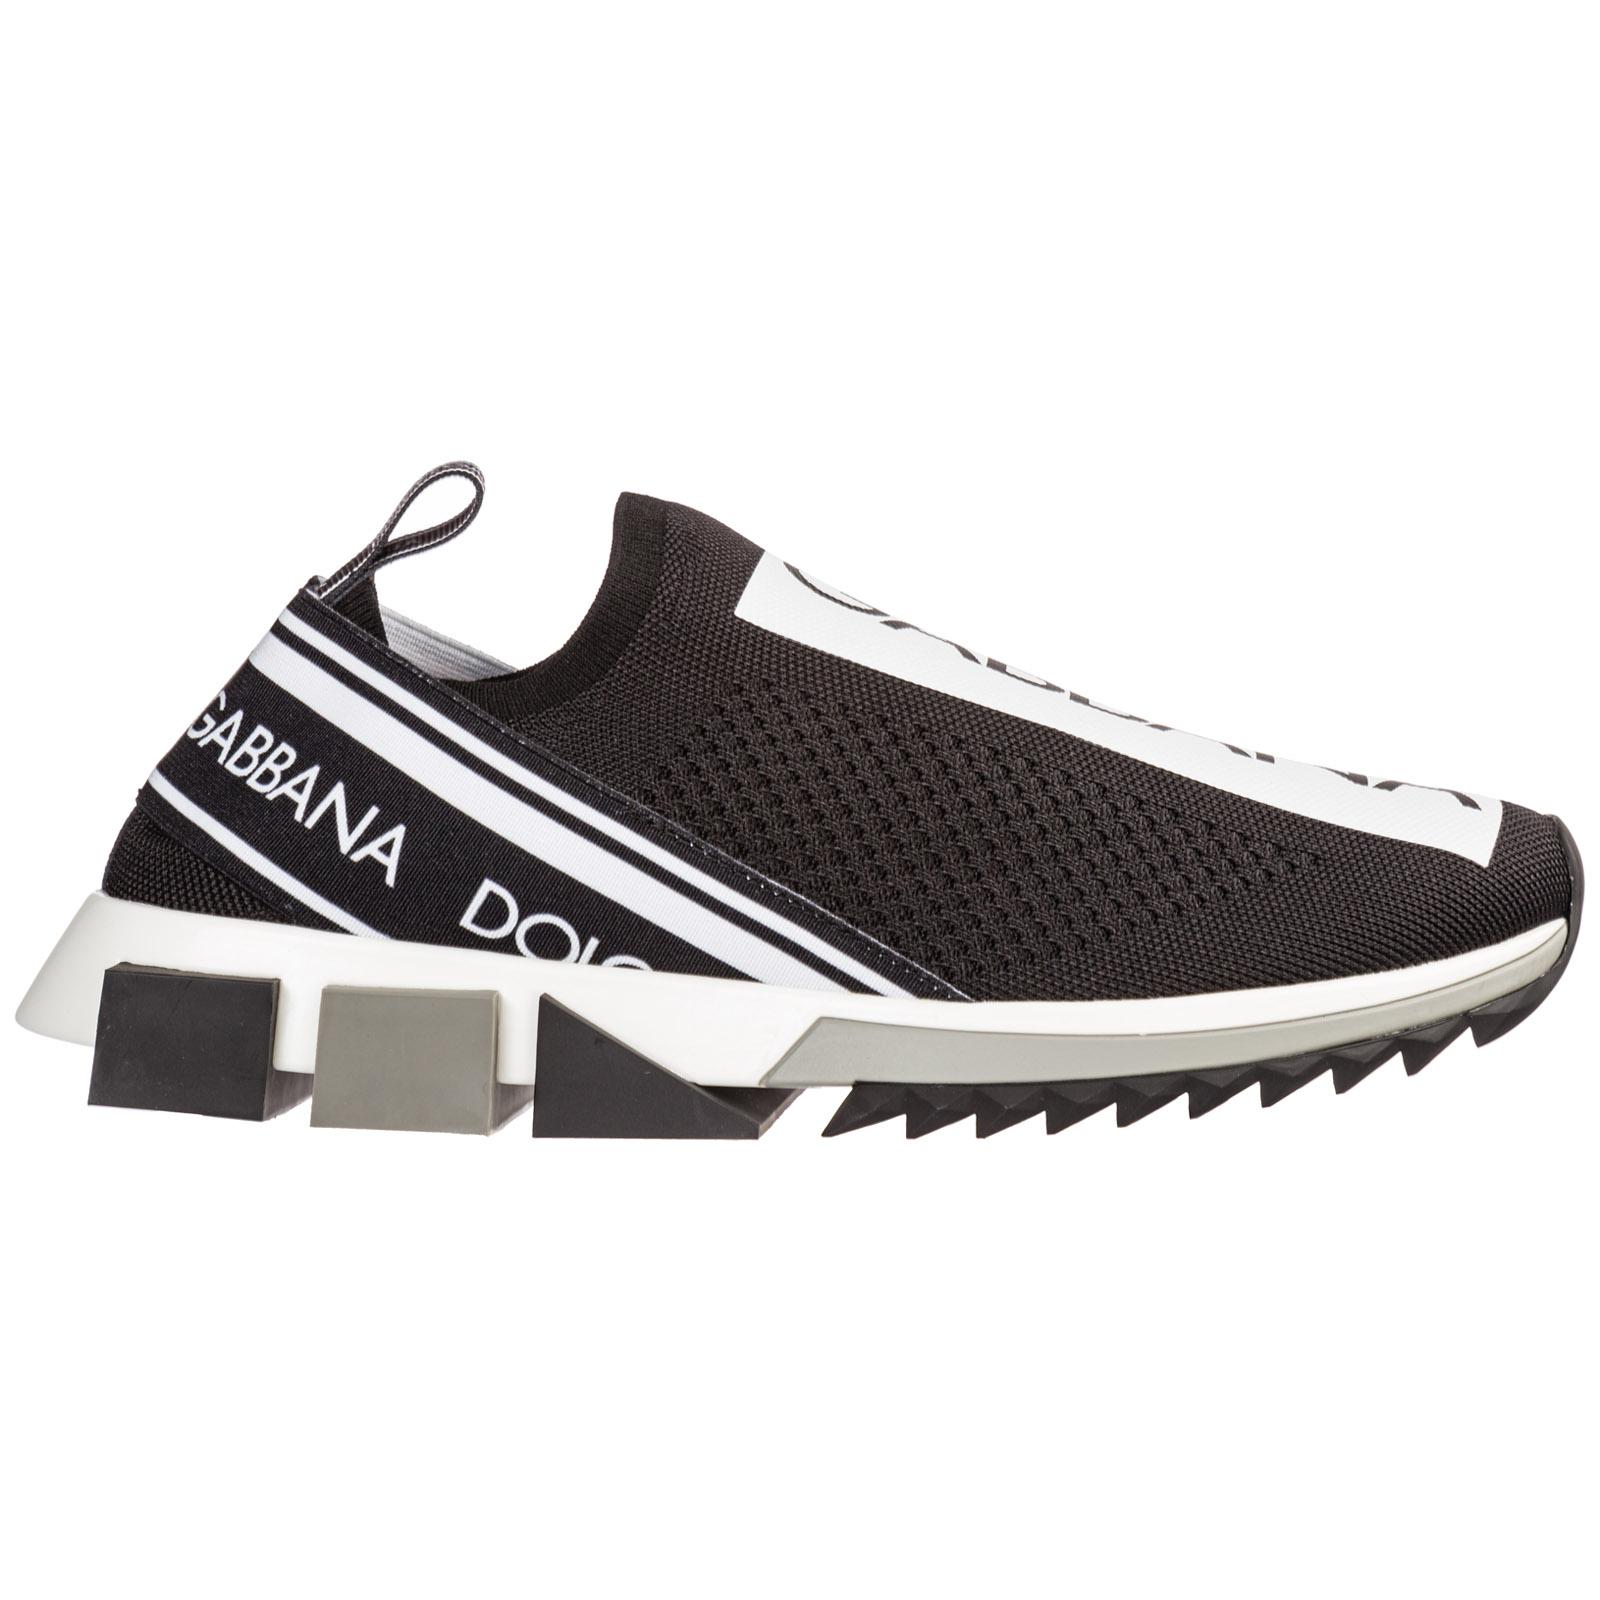 Dolce & Gabbana Logo Printed Sneakers in Black (White) for Men - Save 51% -  Lyst